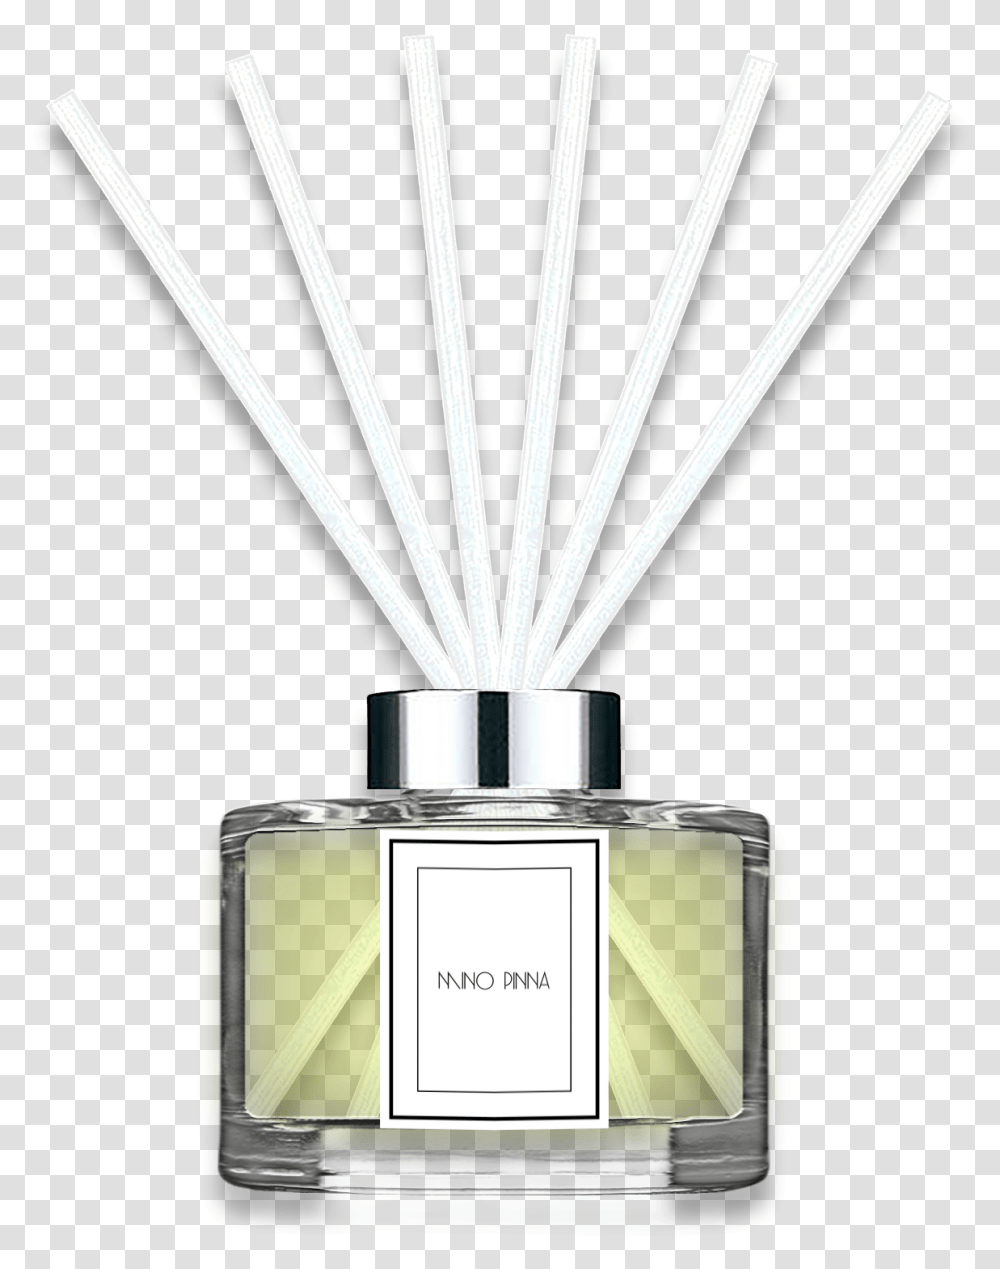 Sardegna Luxury Diffusers Makeup Mirror, Bottle, Cosmetics, Mixer, Appliance Transparent Png